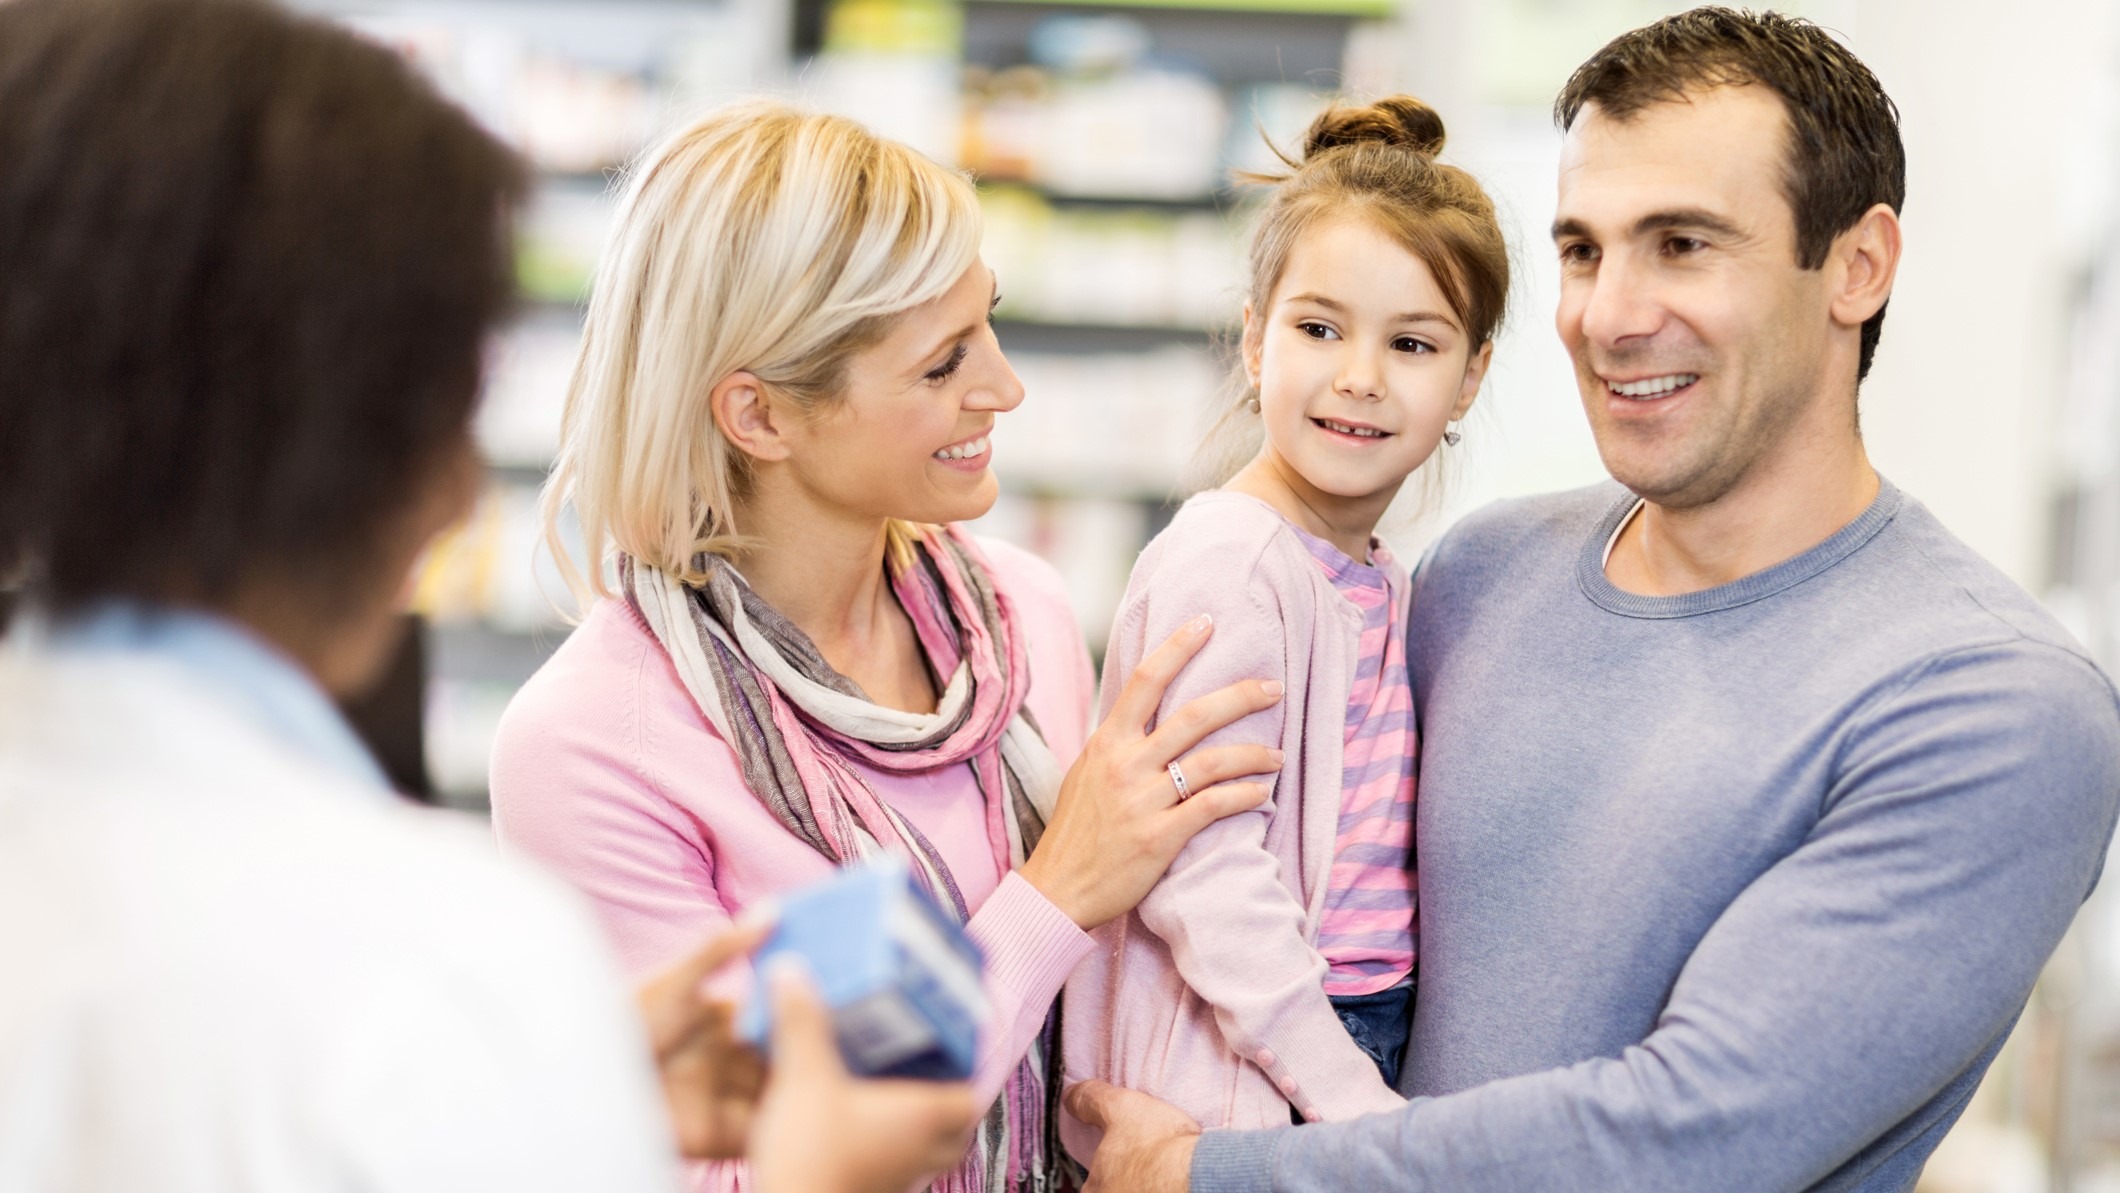 A man and woman have a discussion with a pharmacist.  The man is holding a small child in his arms.  The background is out of focus.